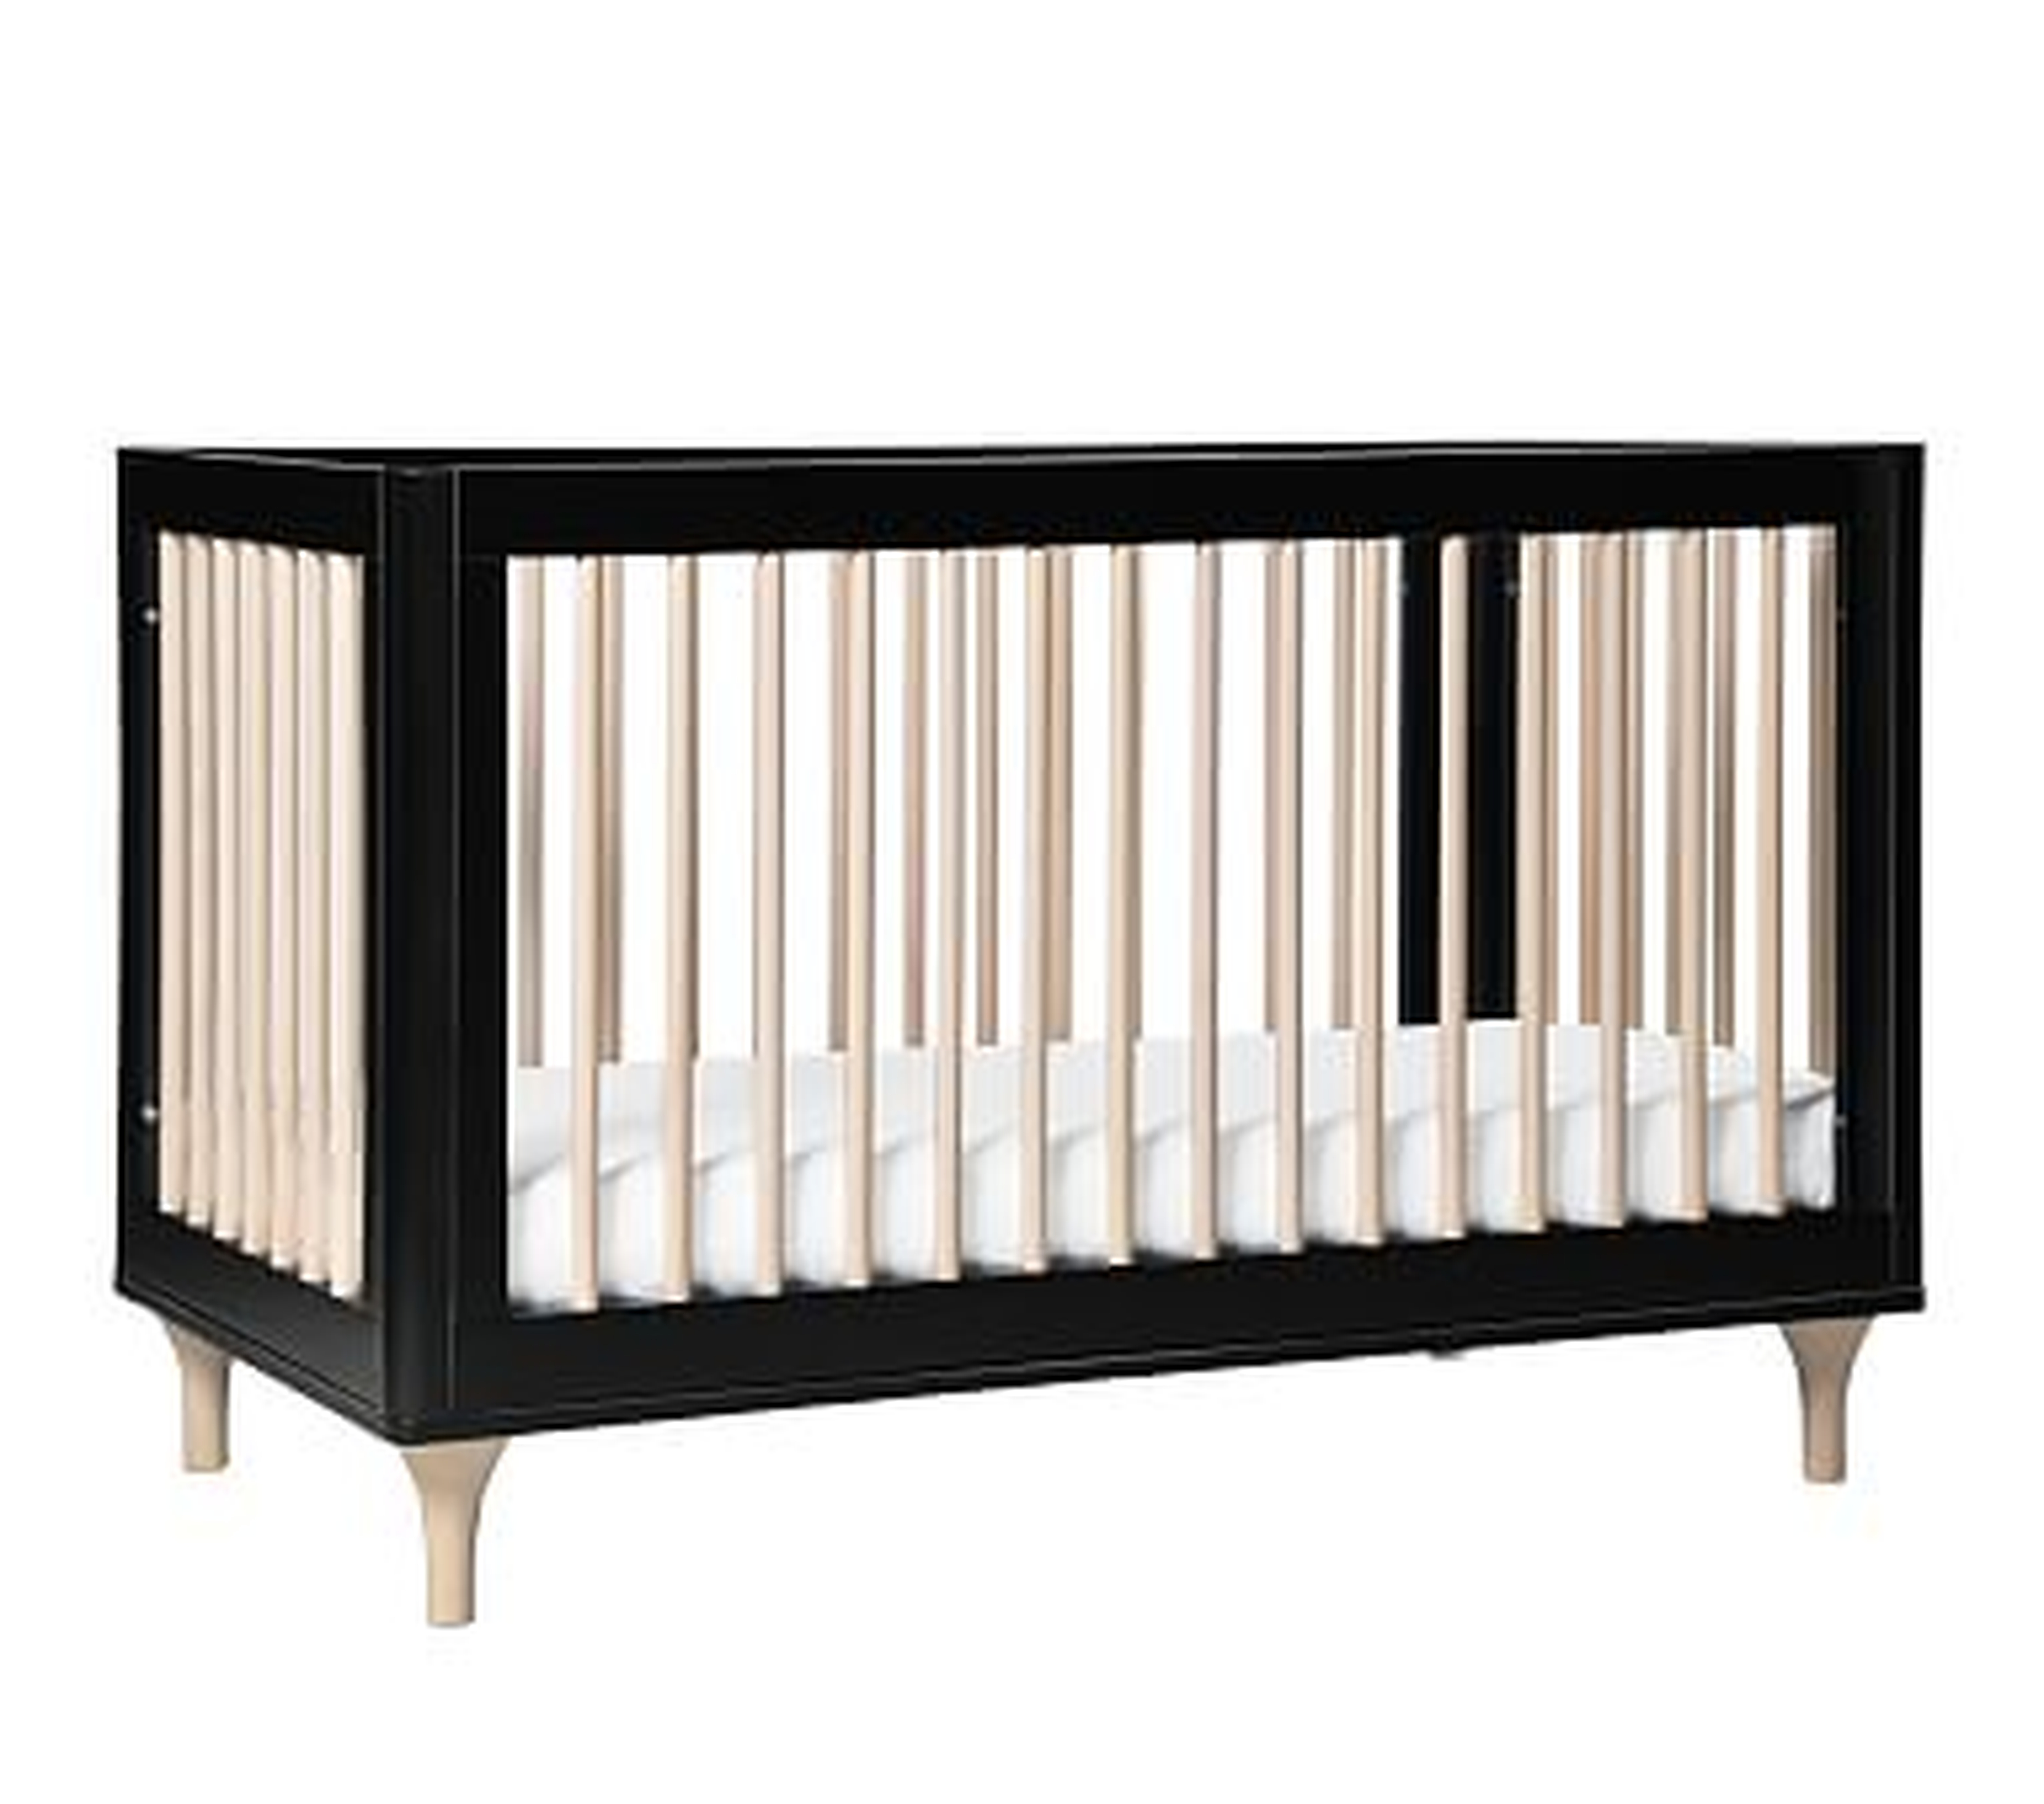 Babyletto Lolly Convertible Crib, Black/Washed Natural, Standard UPS Delivery - Pottery Barn Kids